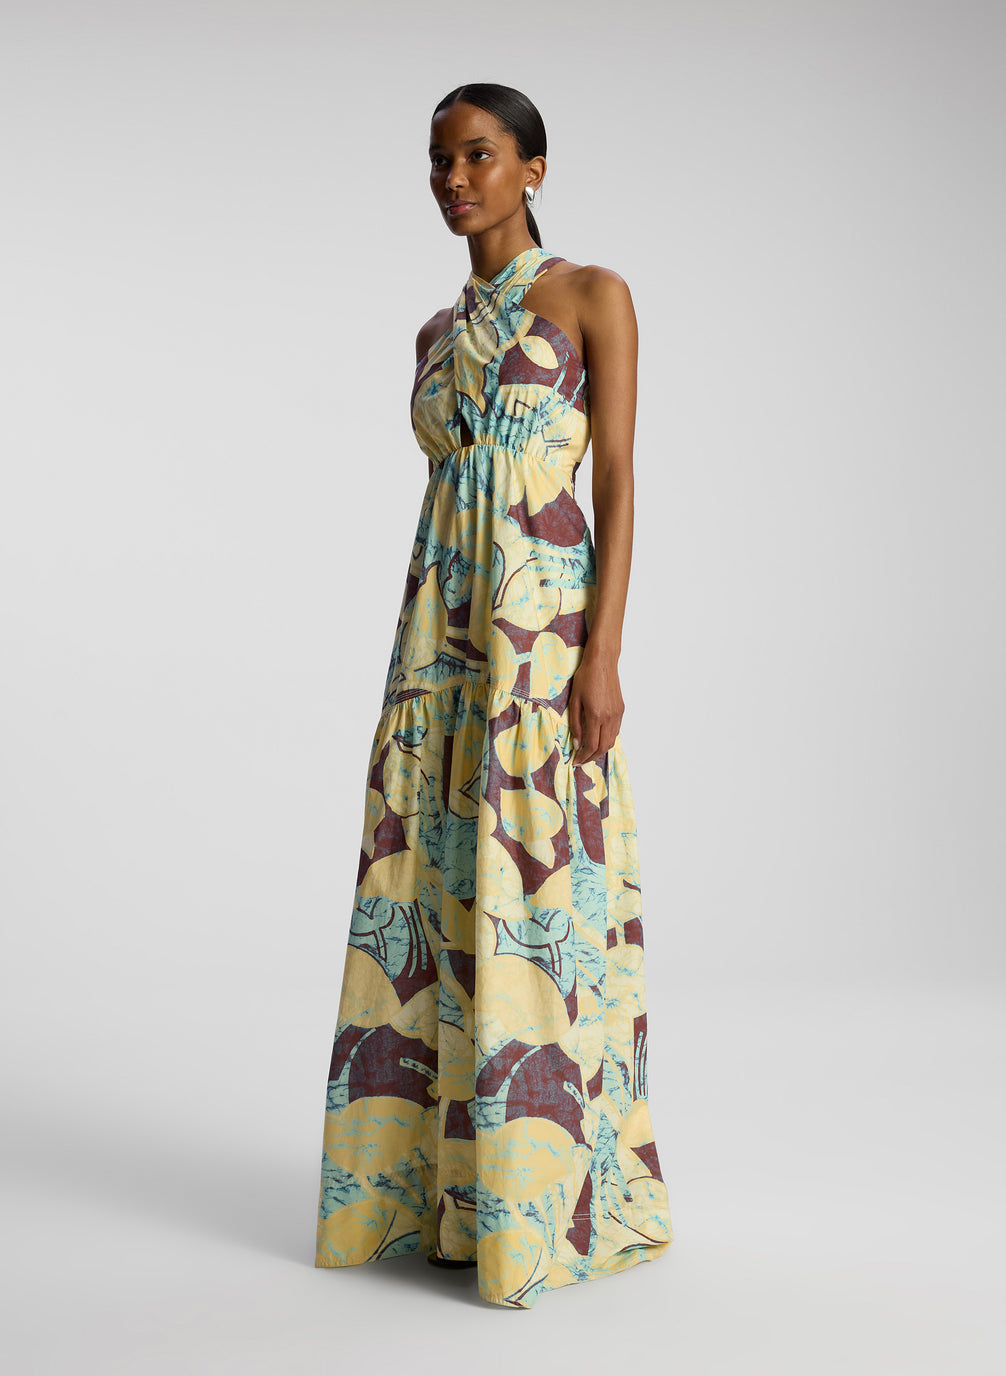 side view of woman wearing printed maxi dress